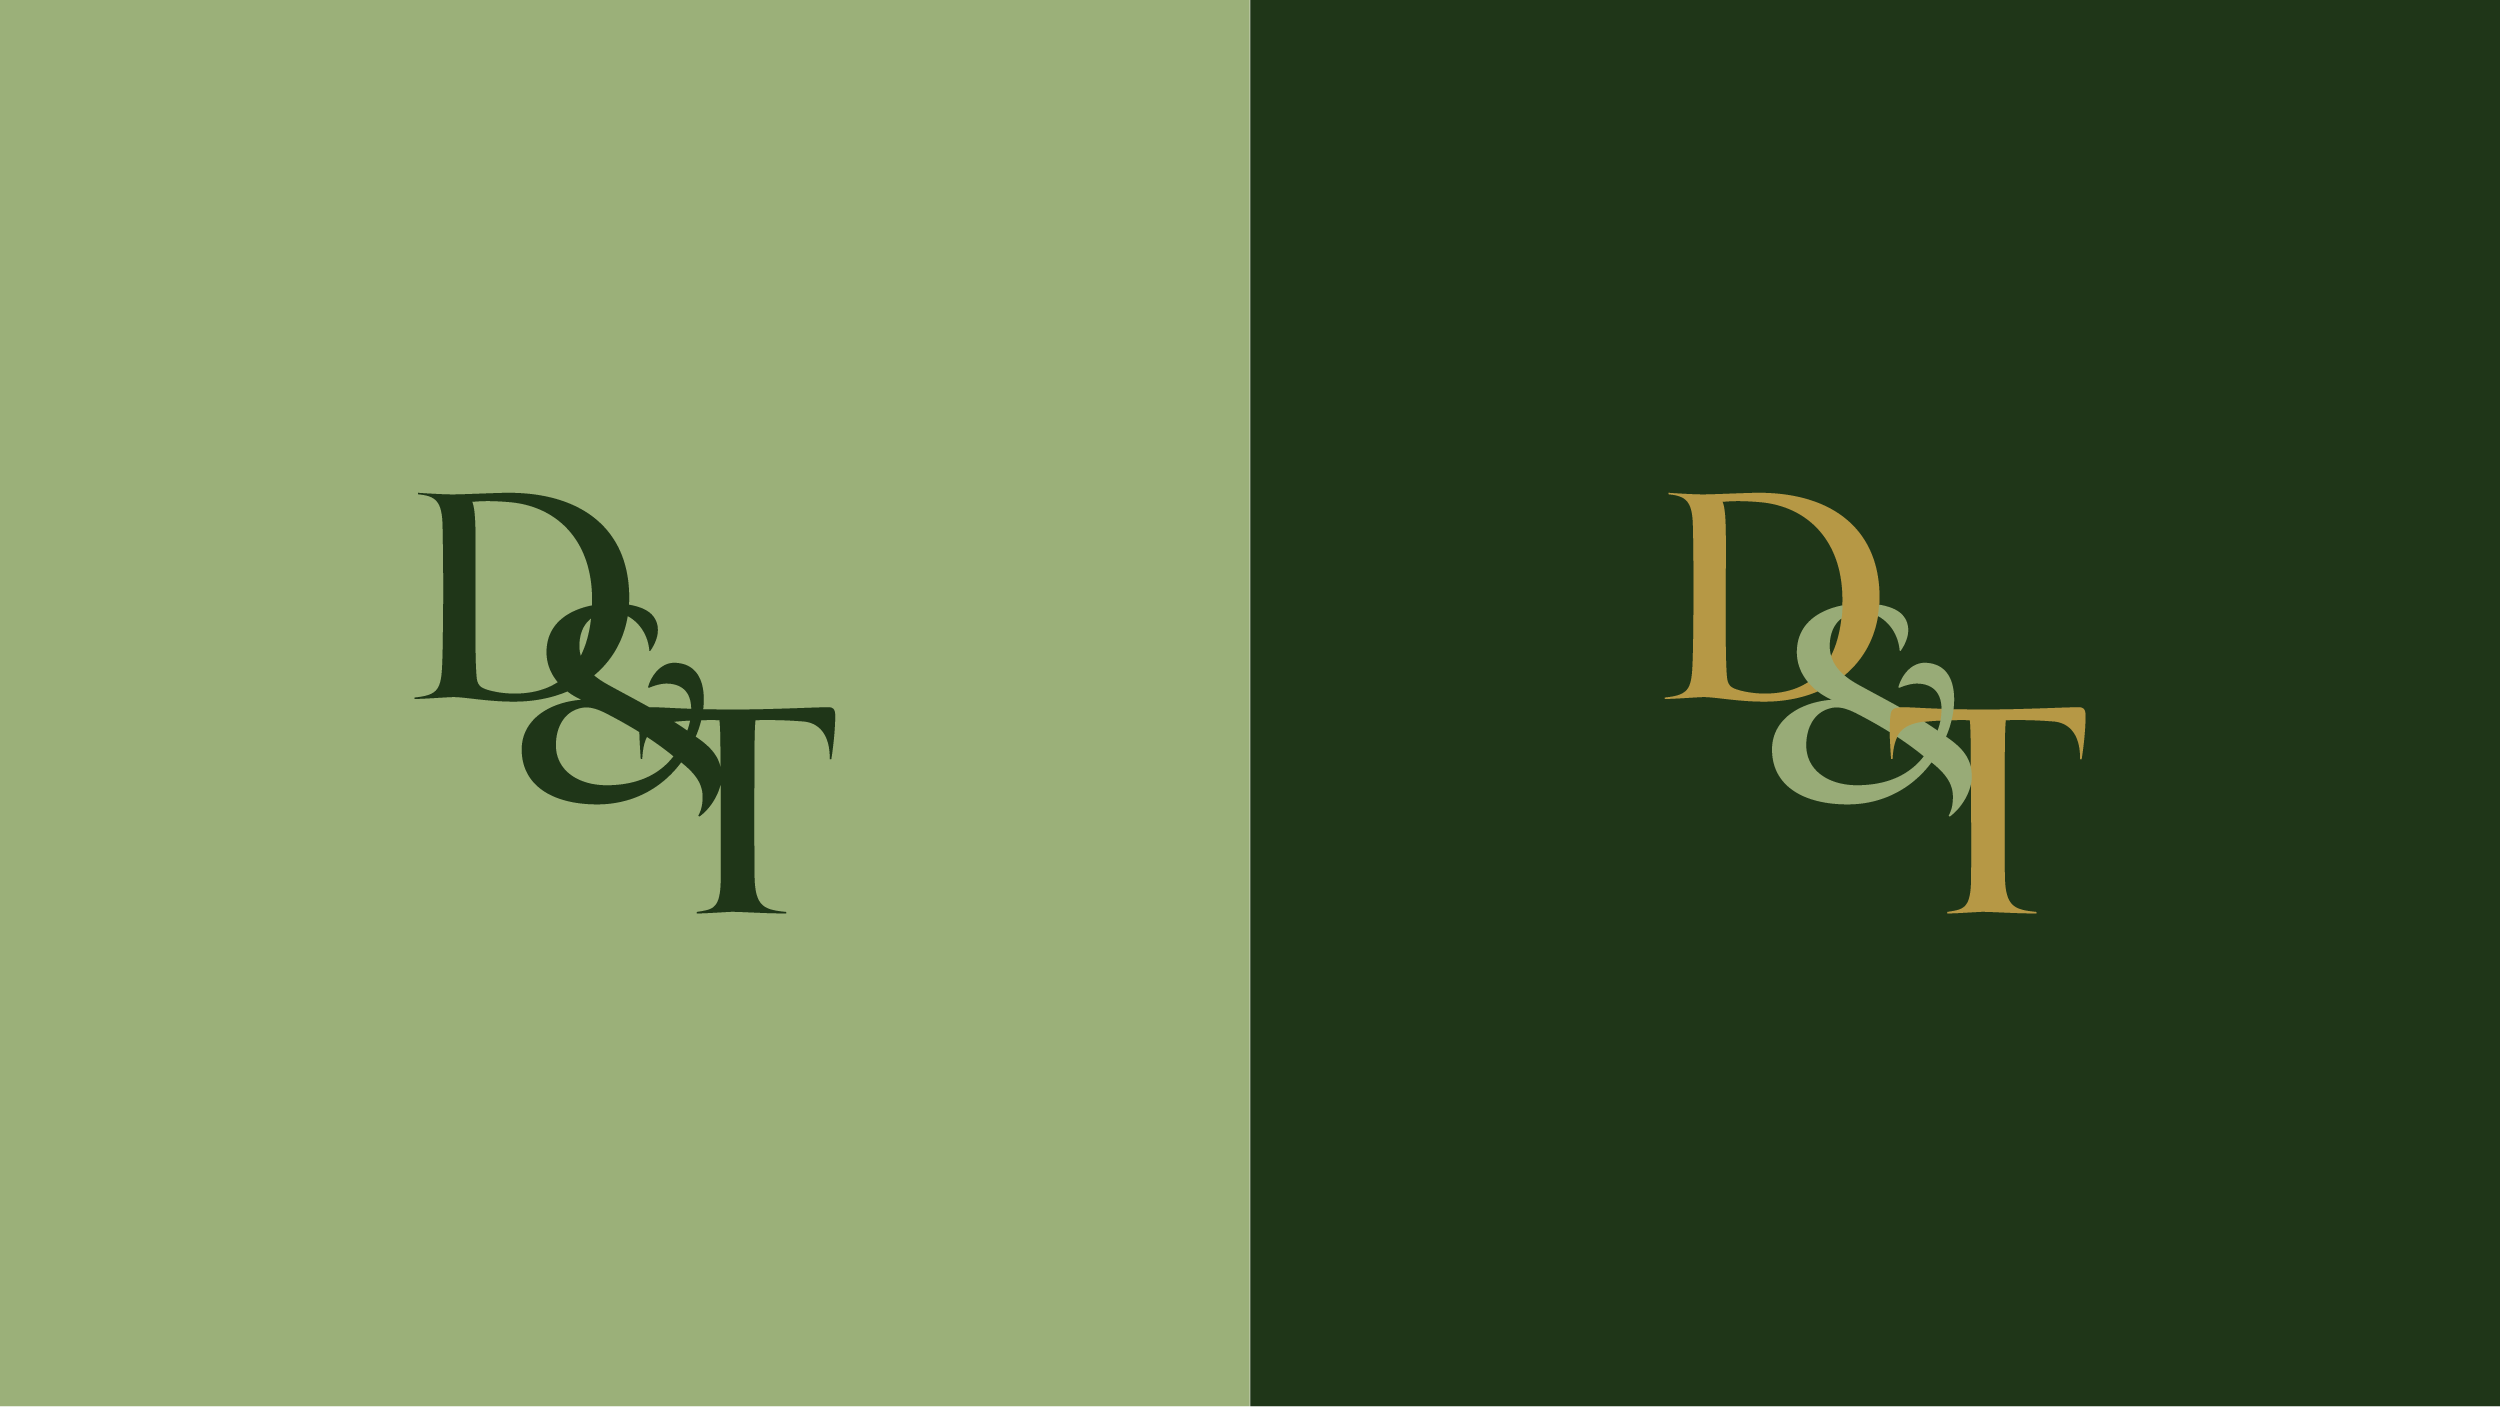 earthy-antique-small-business-brand-design-4.png